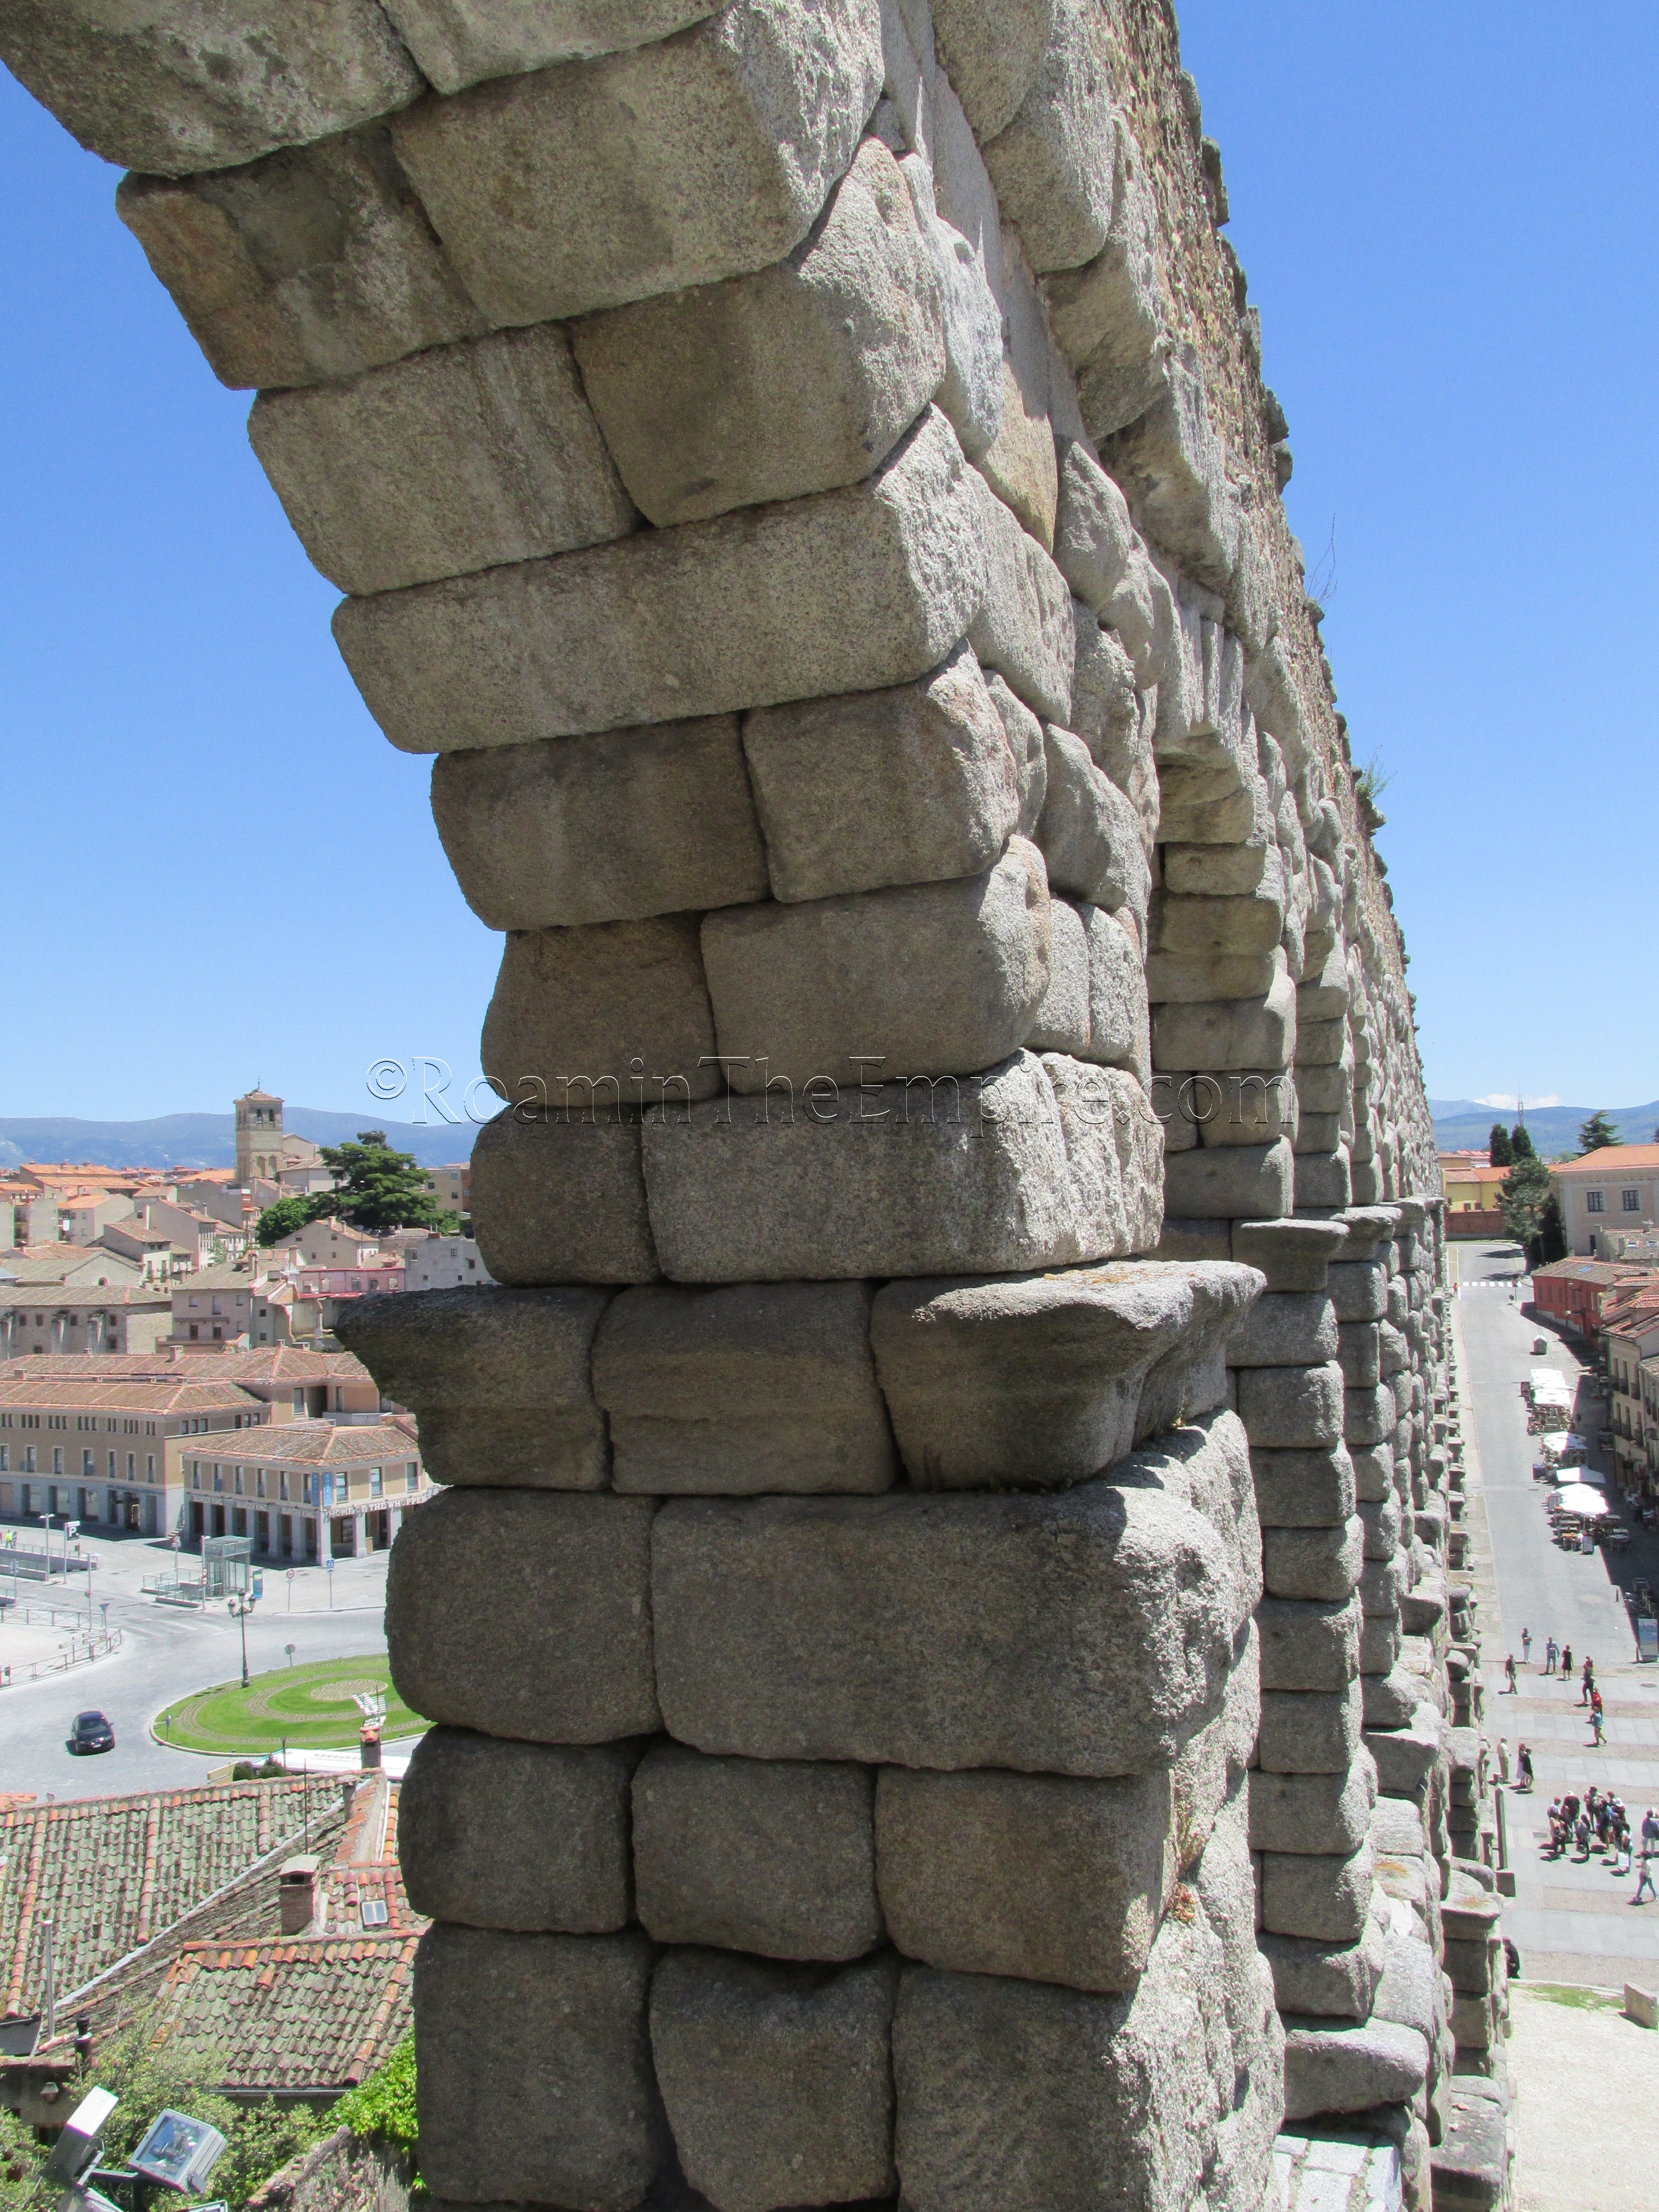 Detail of one of the upper arches of the aqueduct.